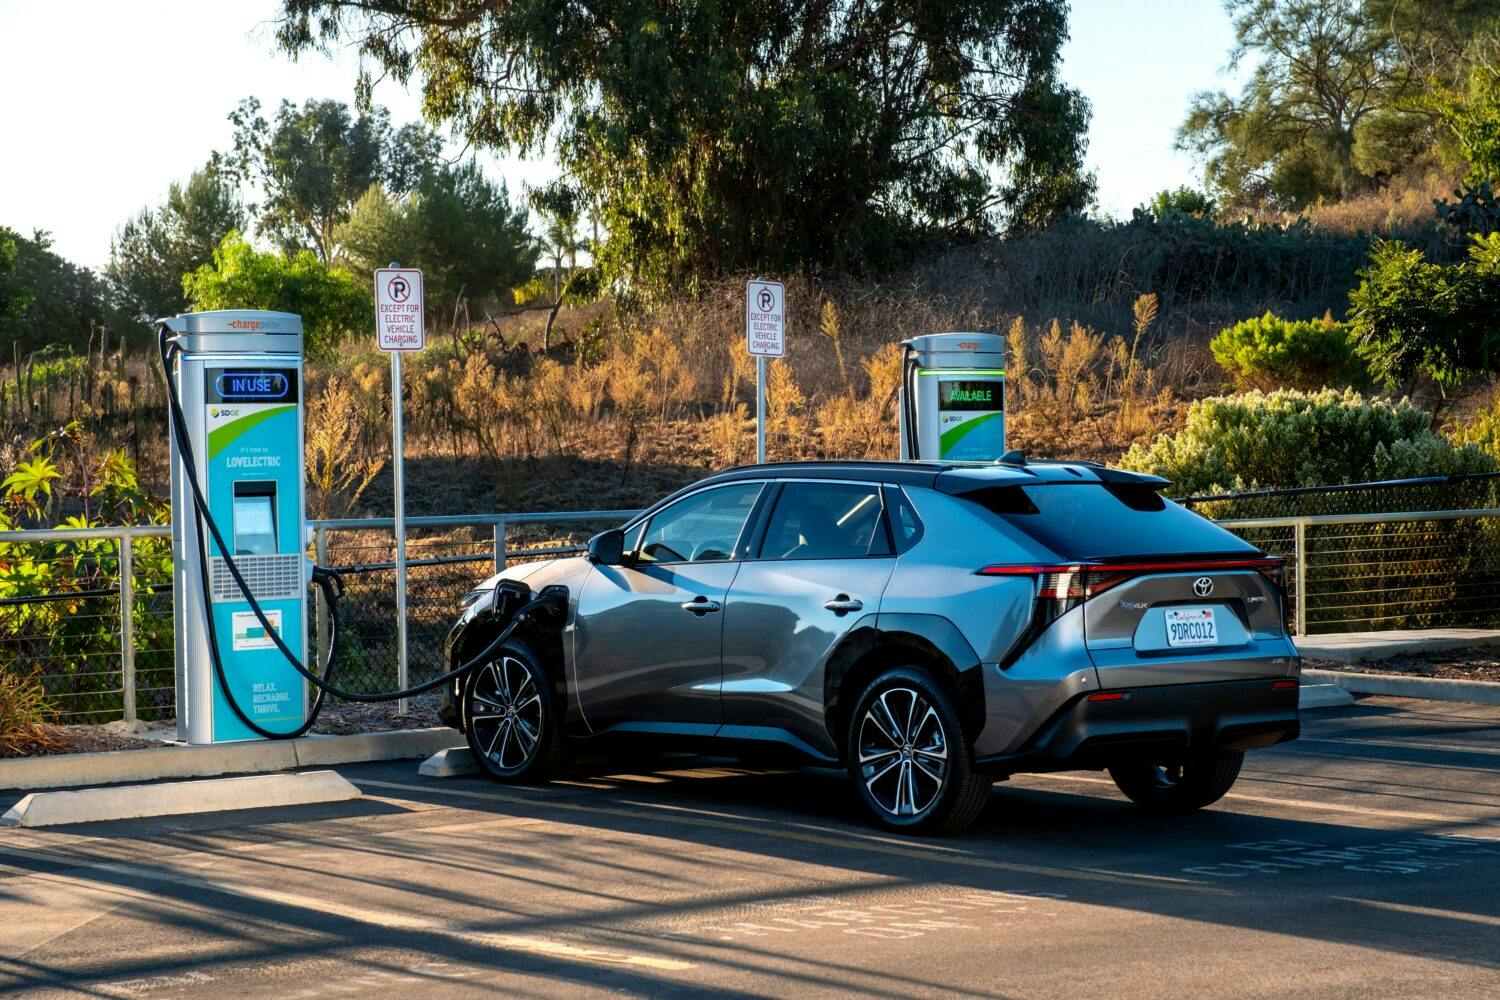 Toyota Slammed For 'Misleading' Public About EVs in FTC Complaint (Updated)  : r/electricvehicles